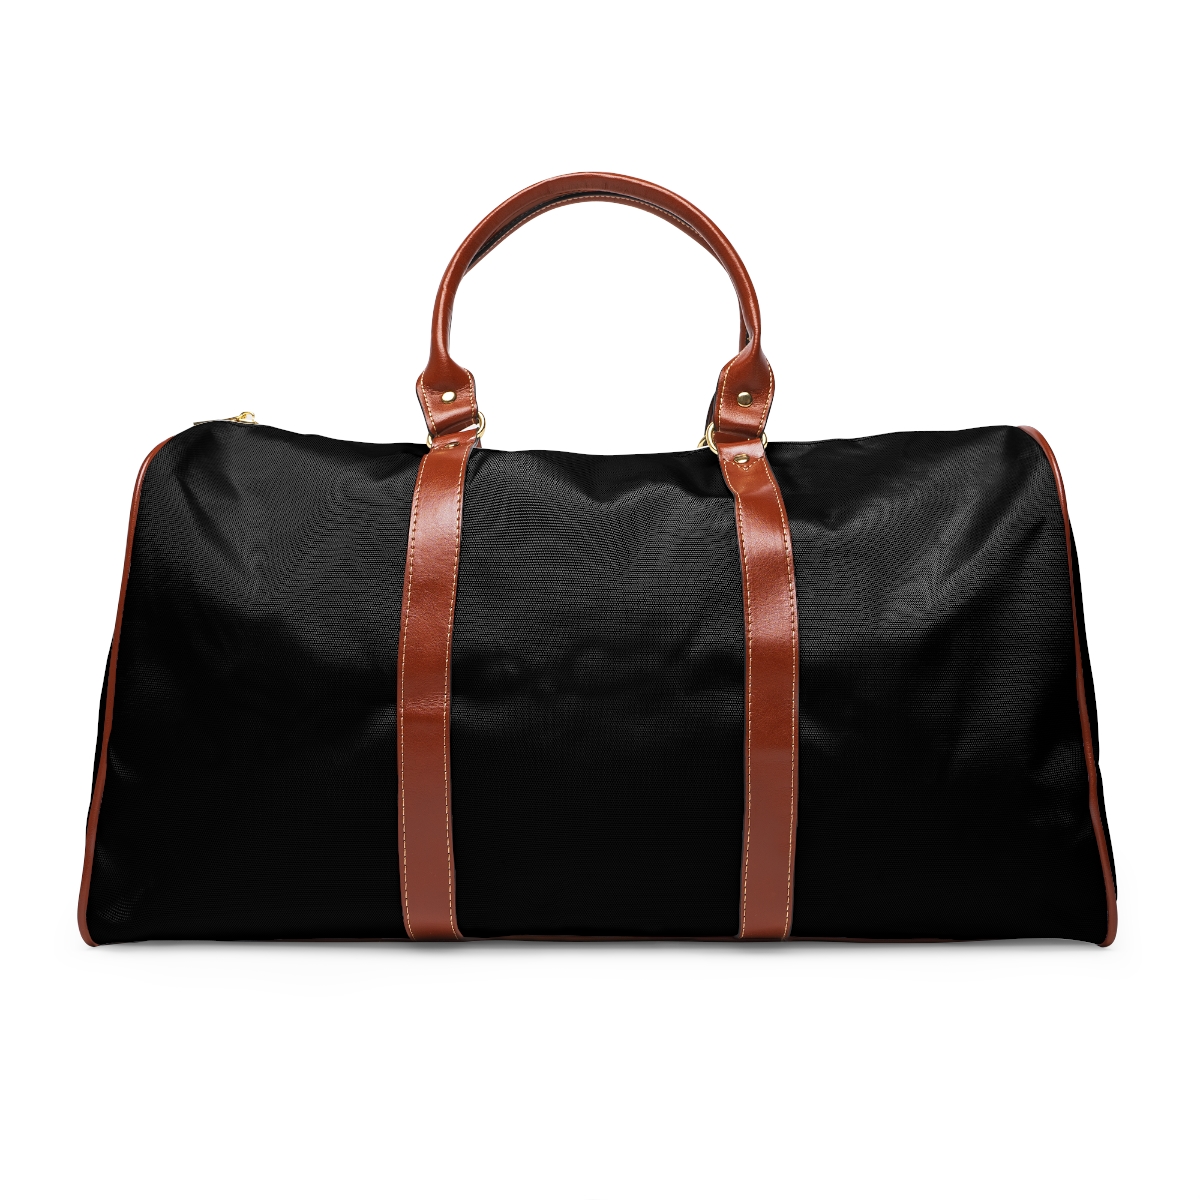 Exclusive IV Travel Bag product thumbnail image